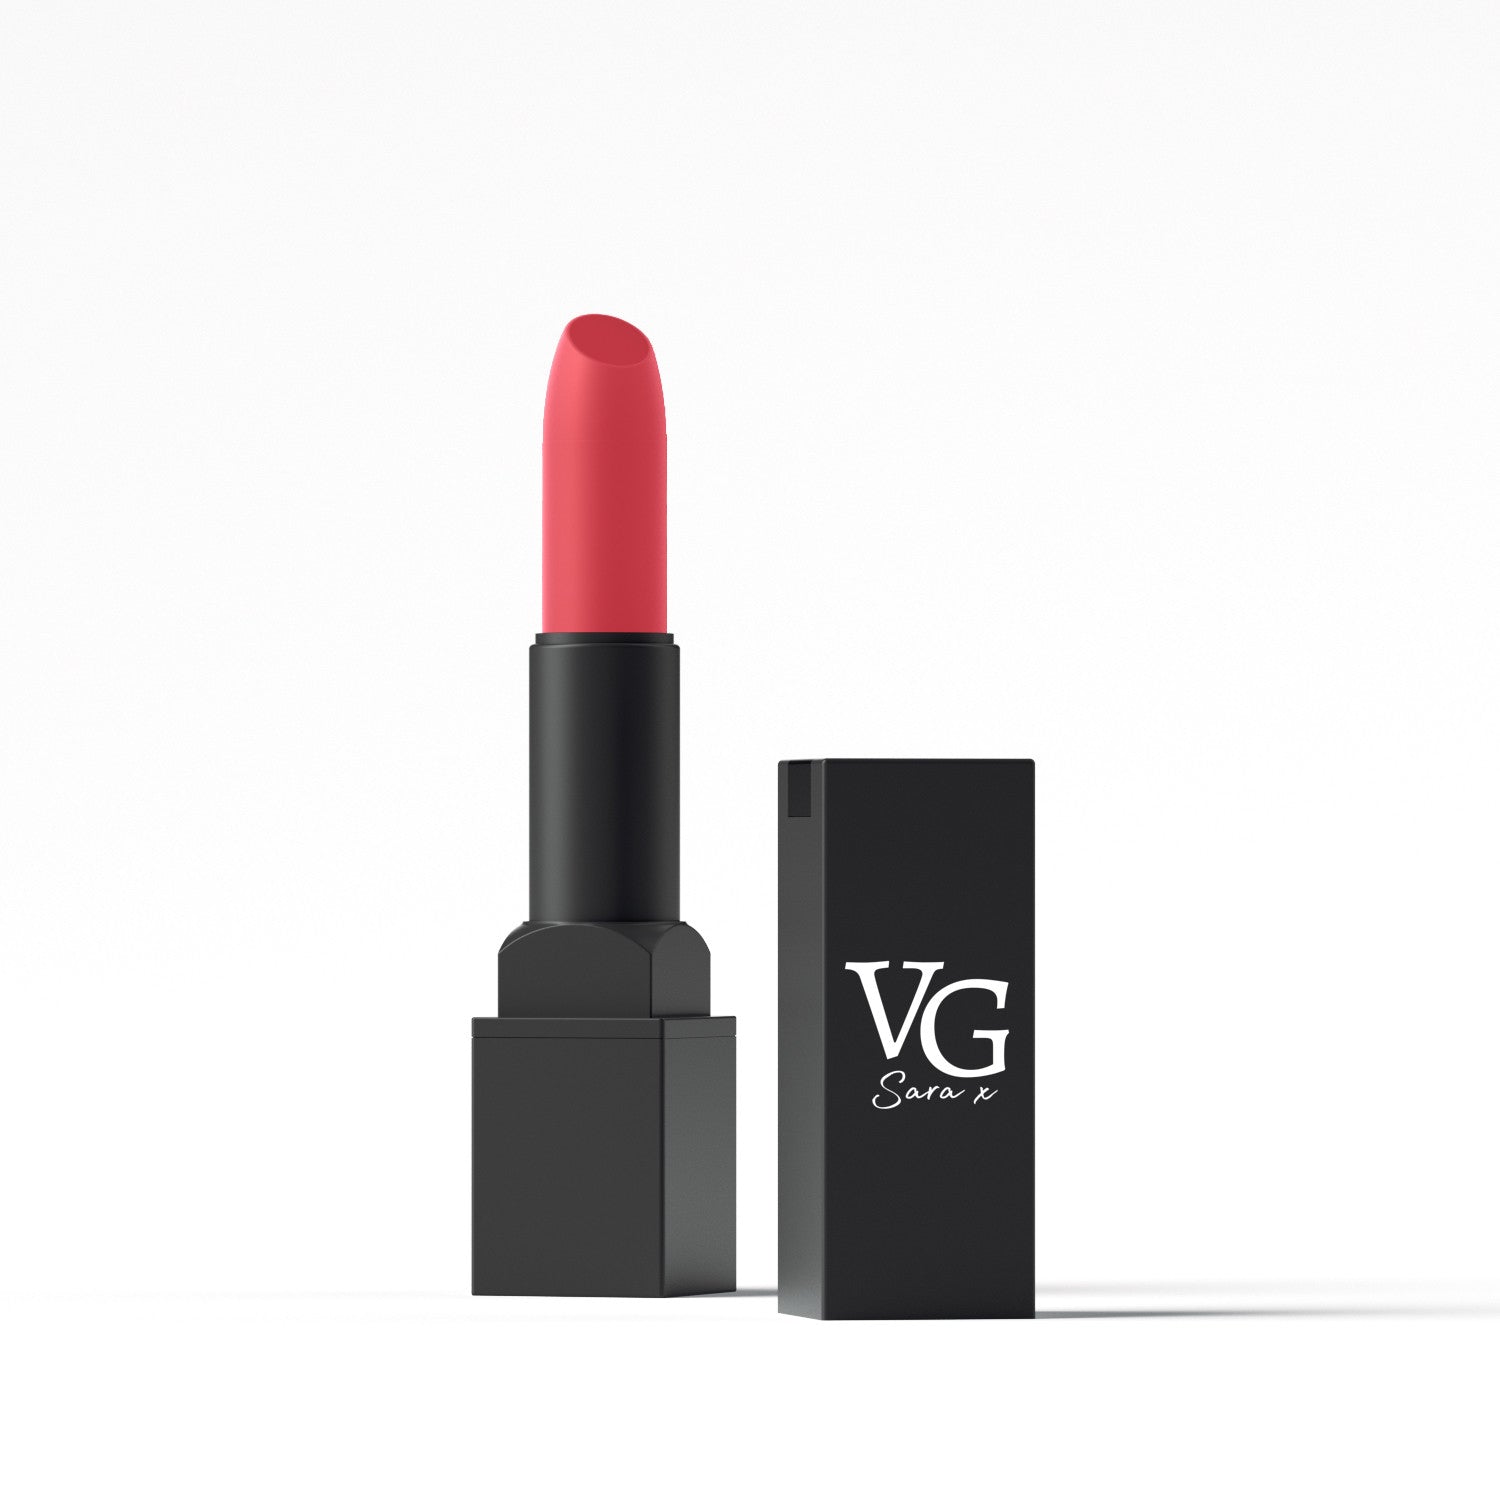 VG logo imprinted on Vitamin E enriched red shade lipstick